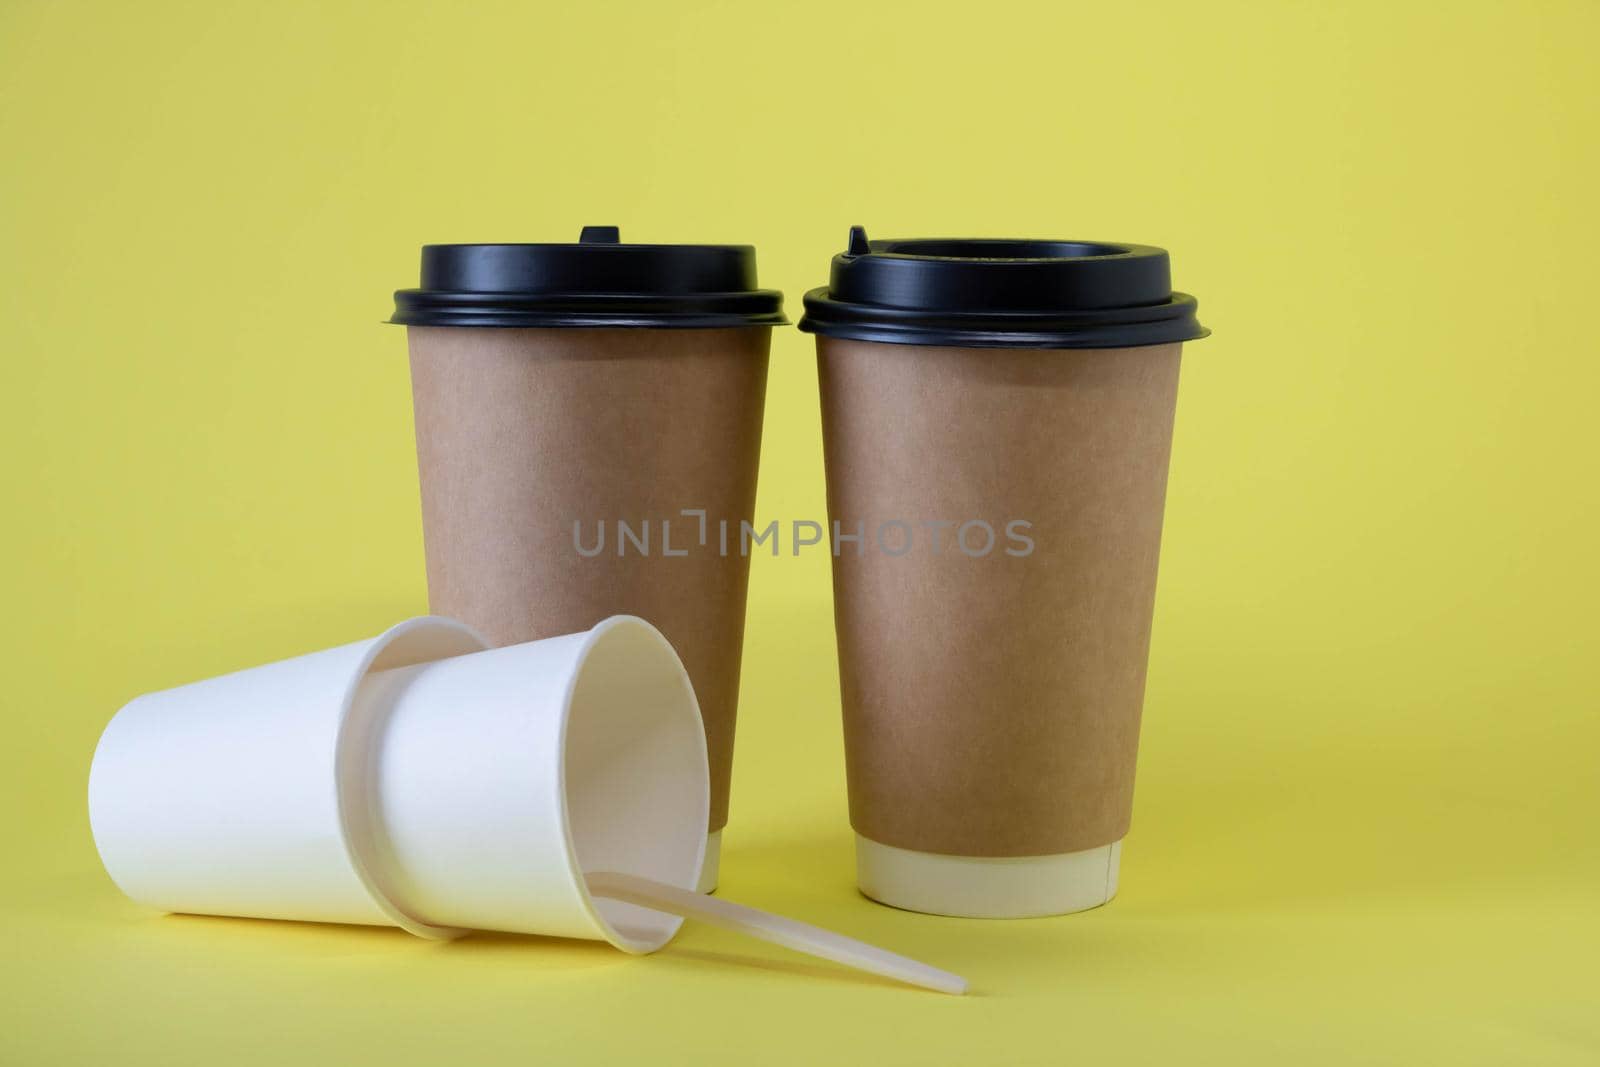 Paper disposable cups for coffee and drinks. Takeaway food.